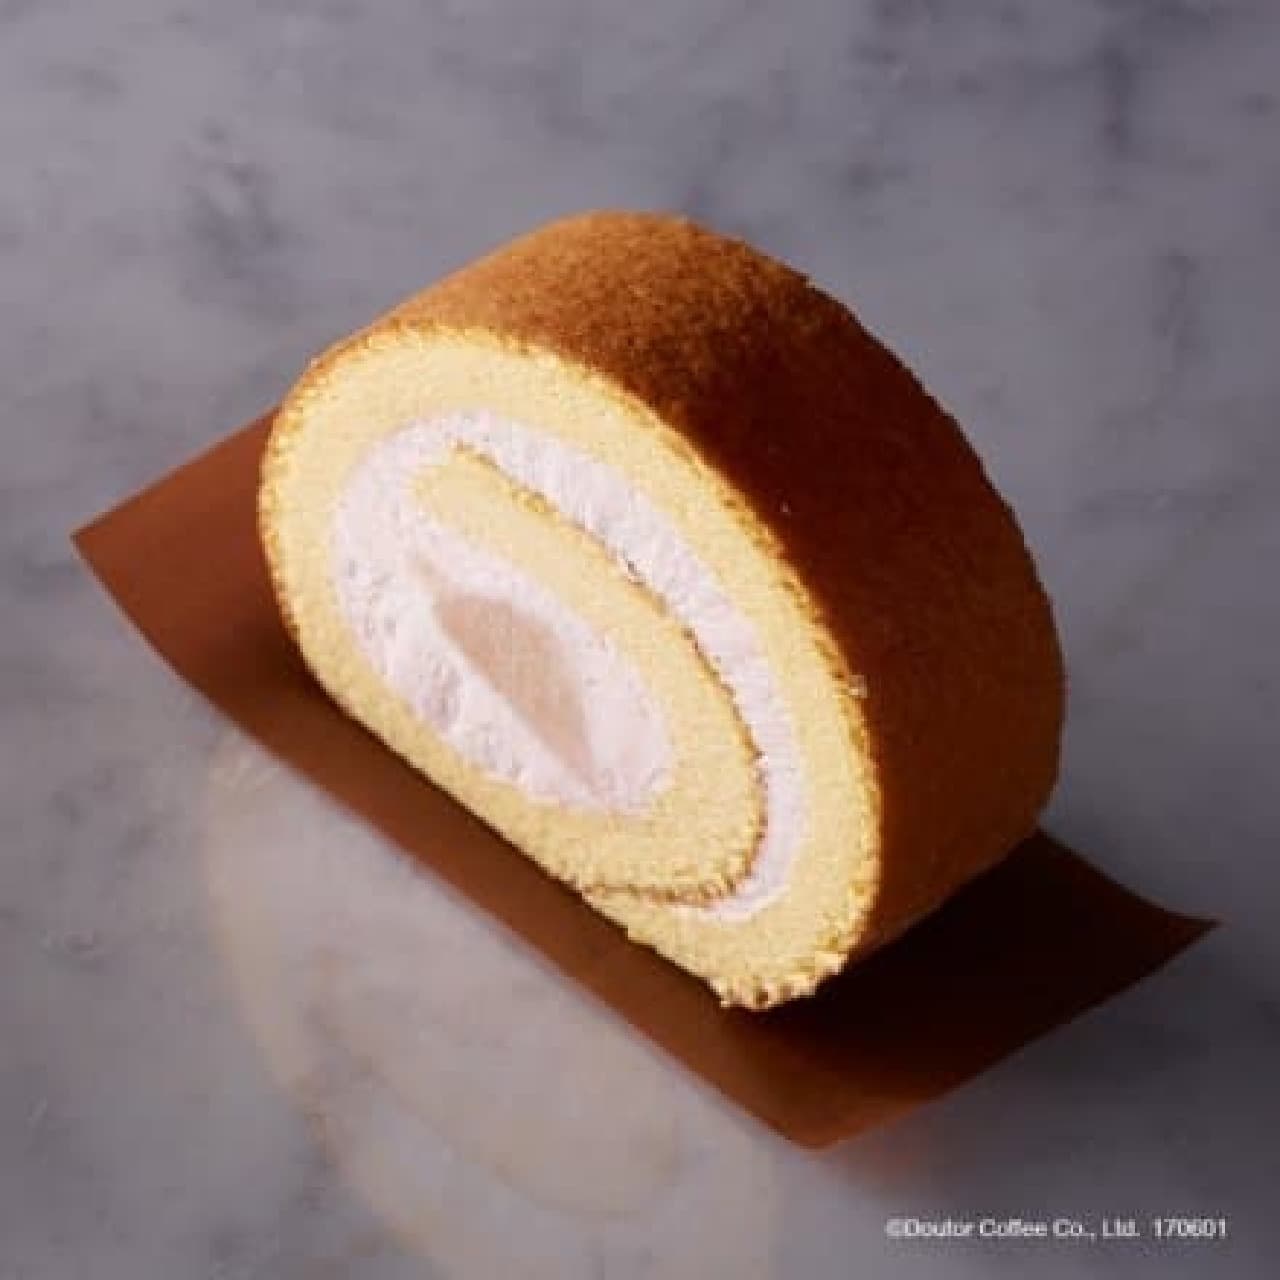 Excelsior Cafe "Domestic Peach Creamy Roll"